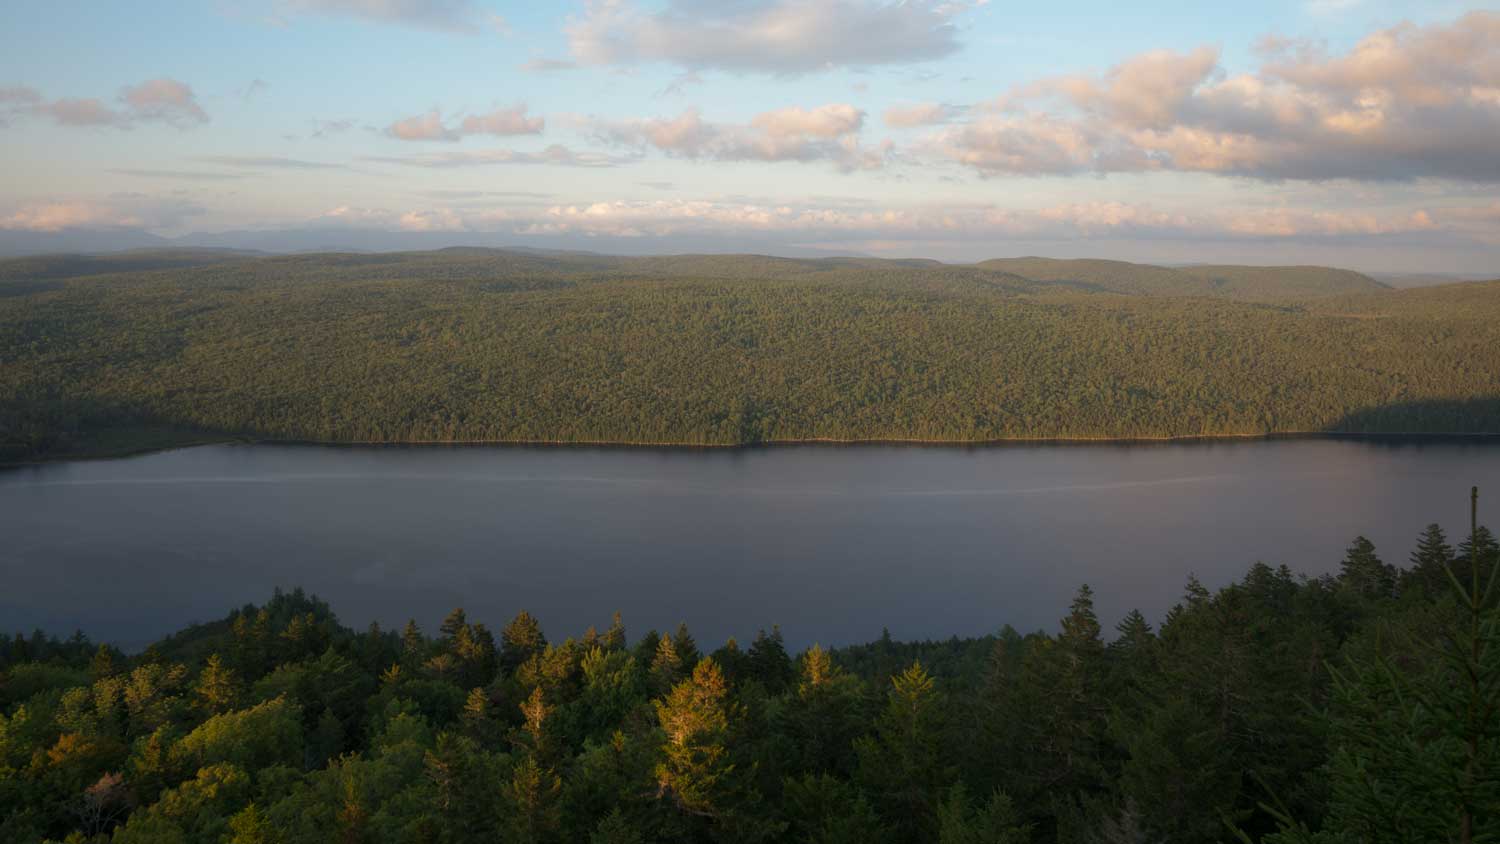 Nahmakanta Lake and Ecological Reserve as viewed from Nesuntabunt Mountain on the Appalachian Trail